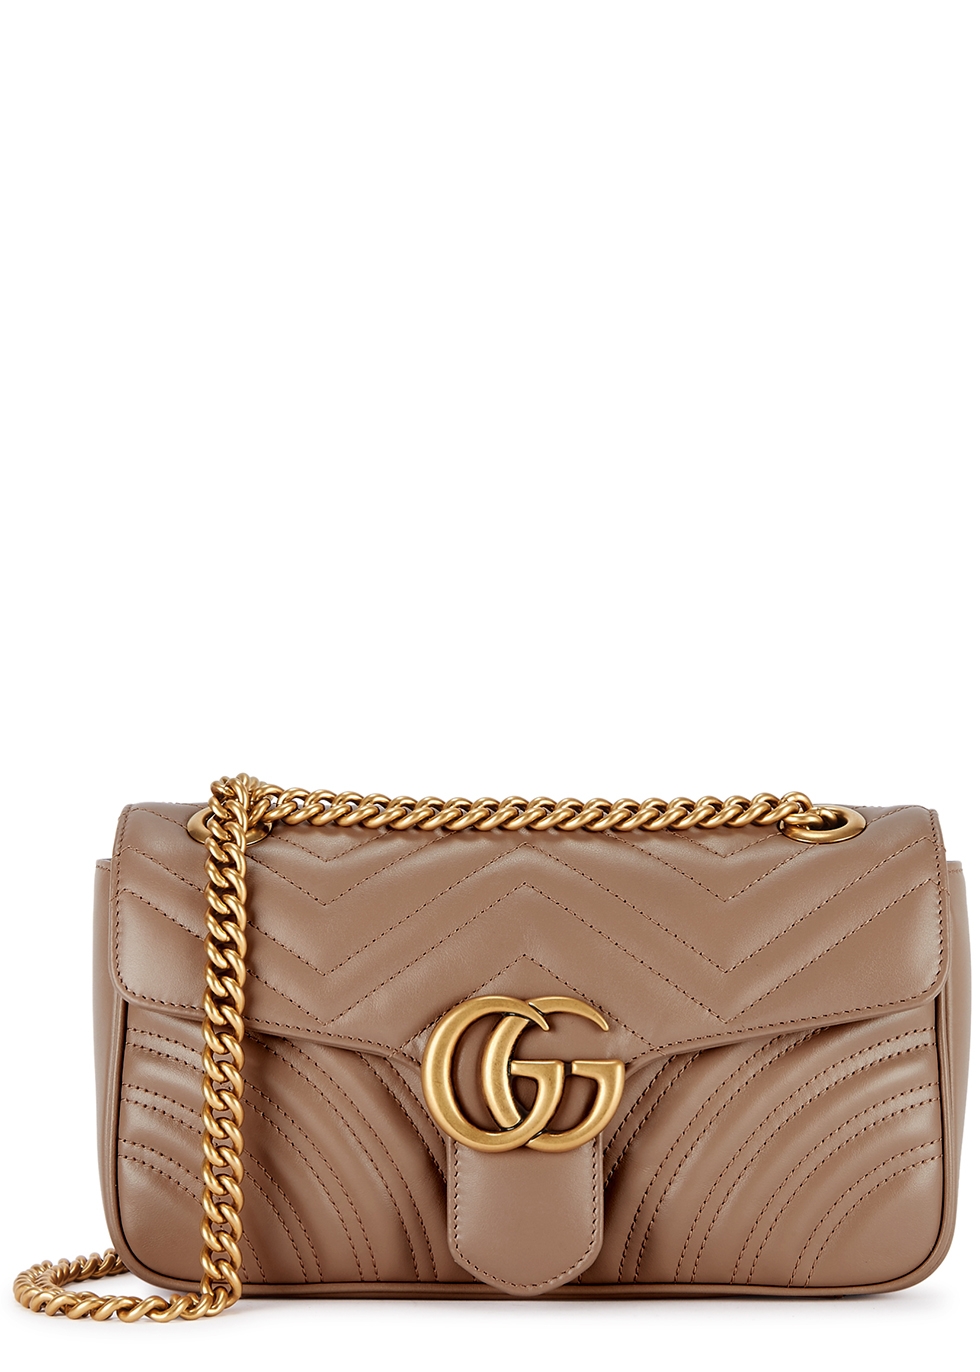 buy gucci marmont bag